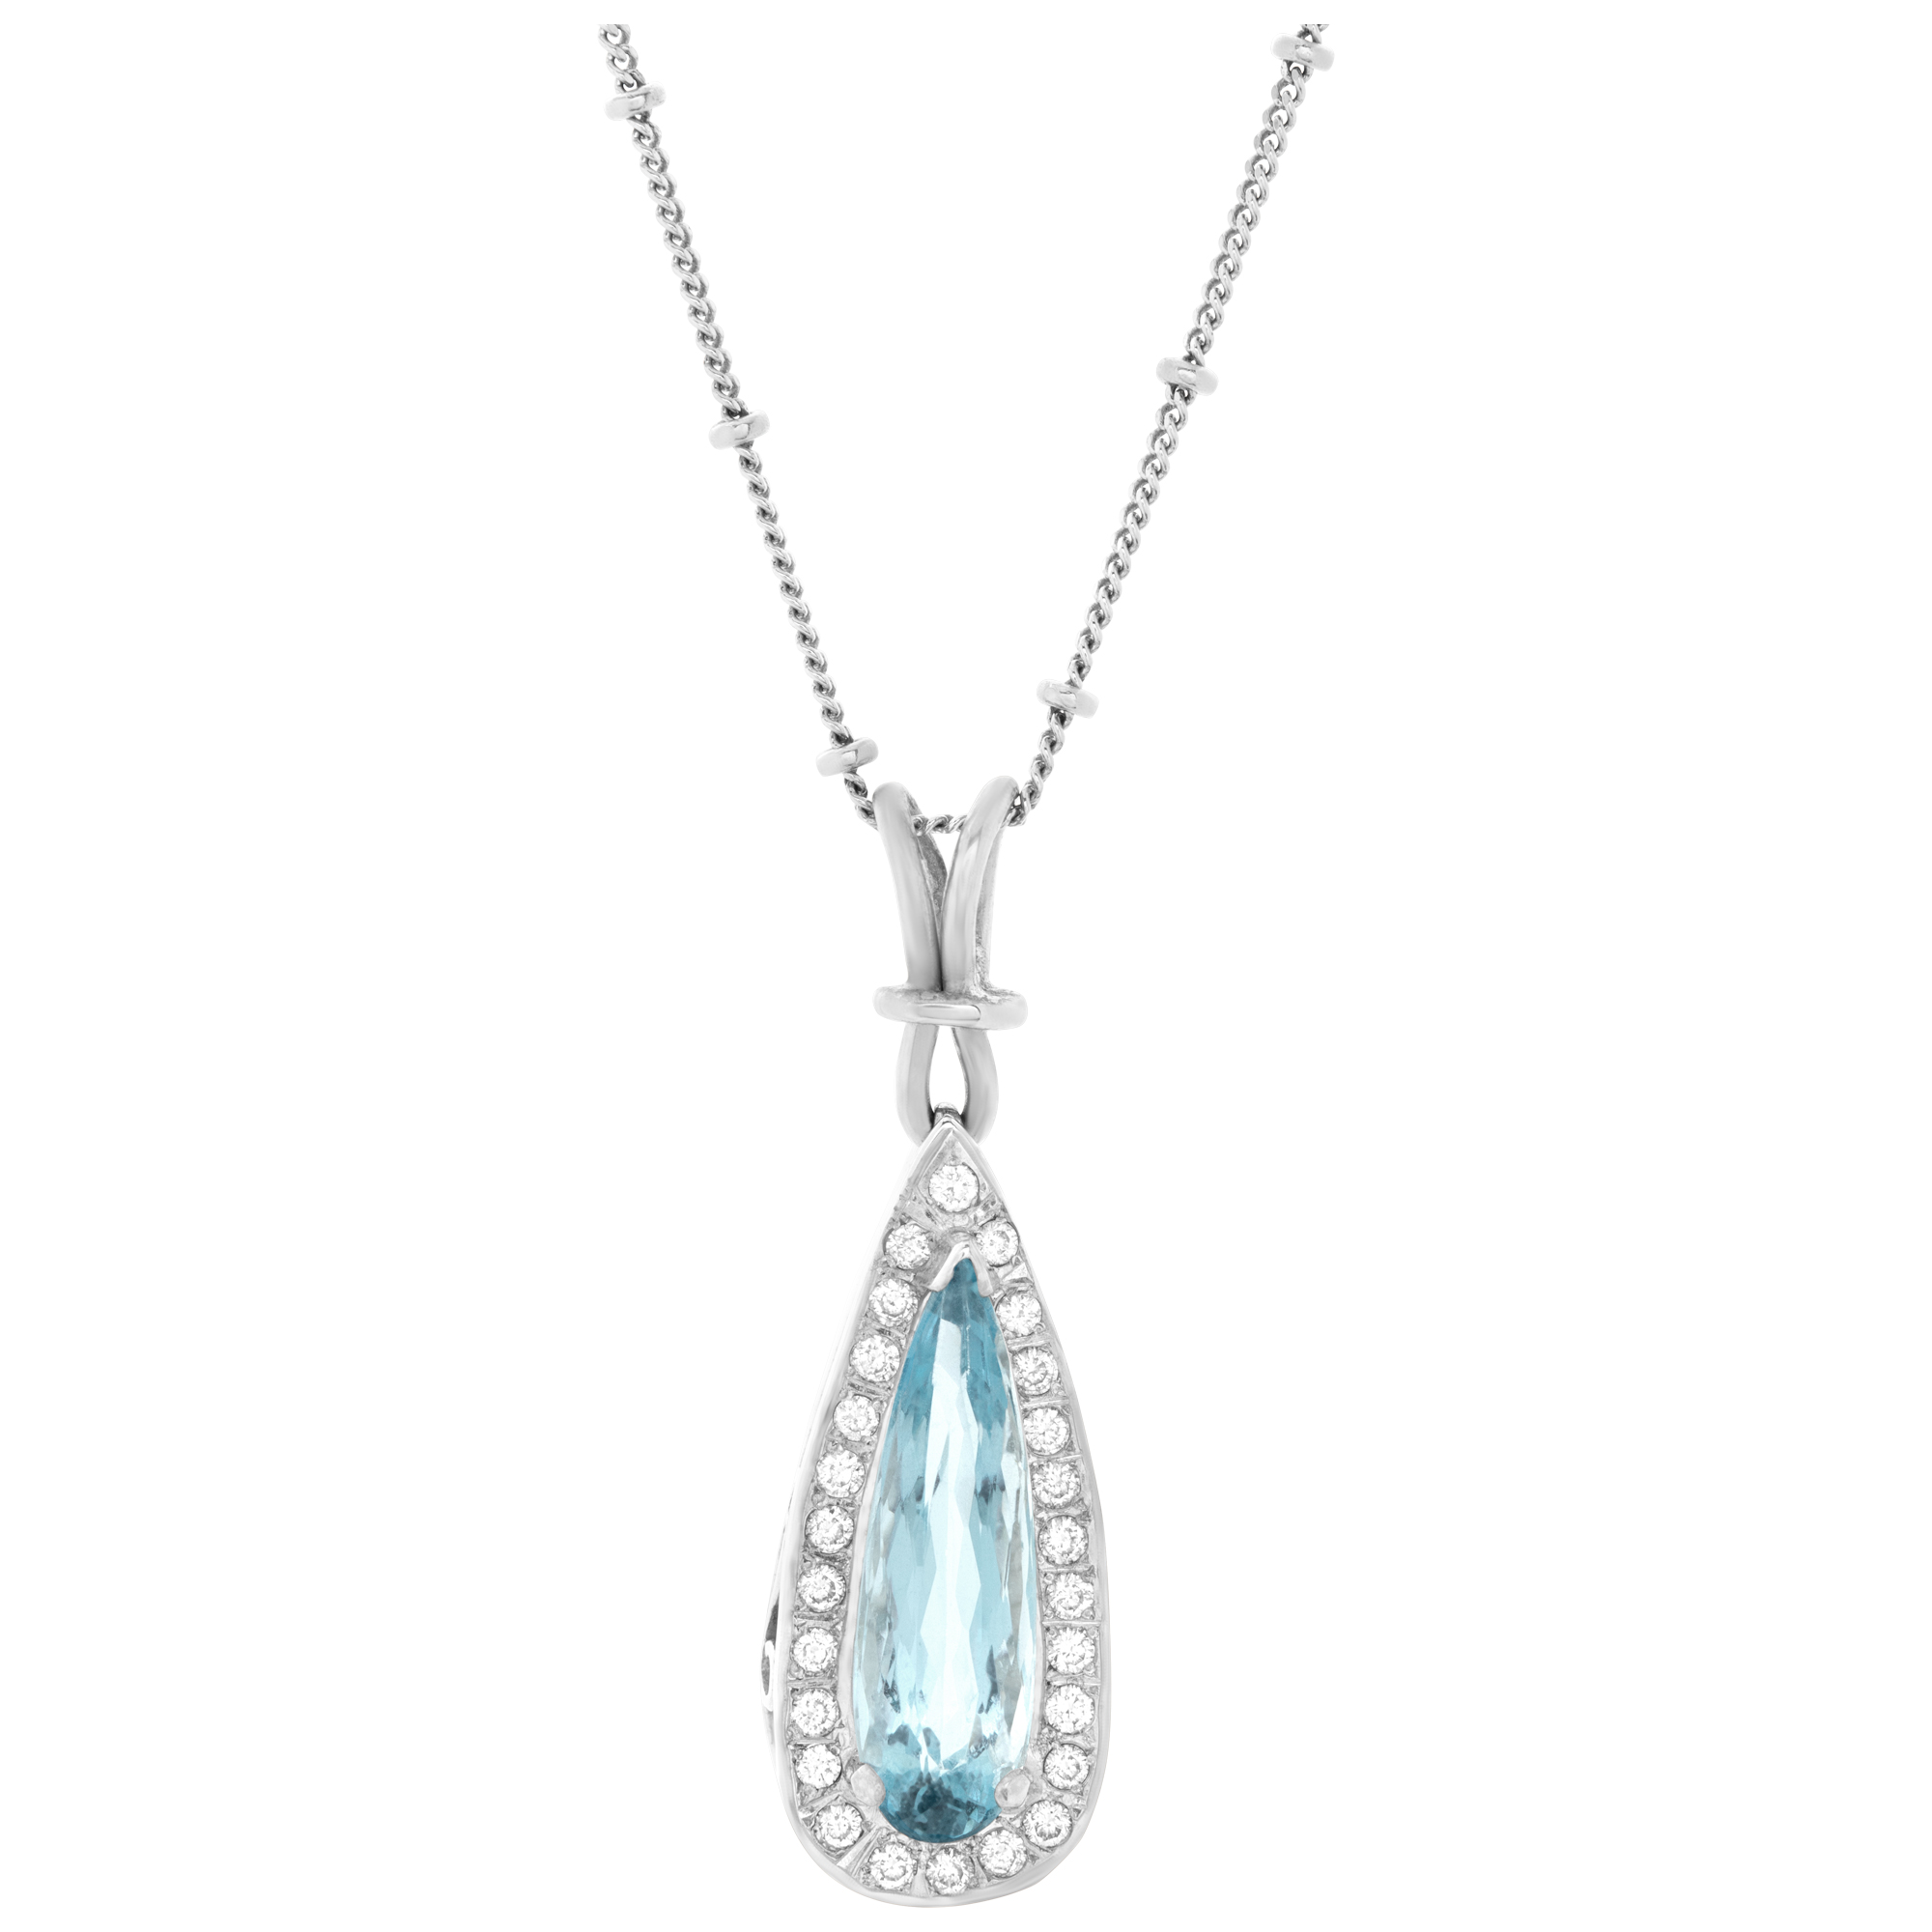 Necklace with blue topaz pendant and diamond accents